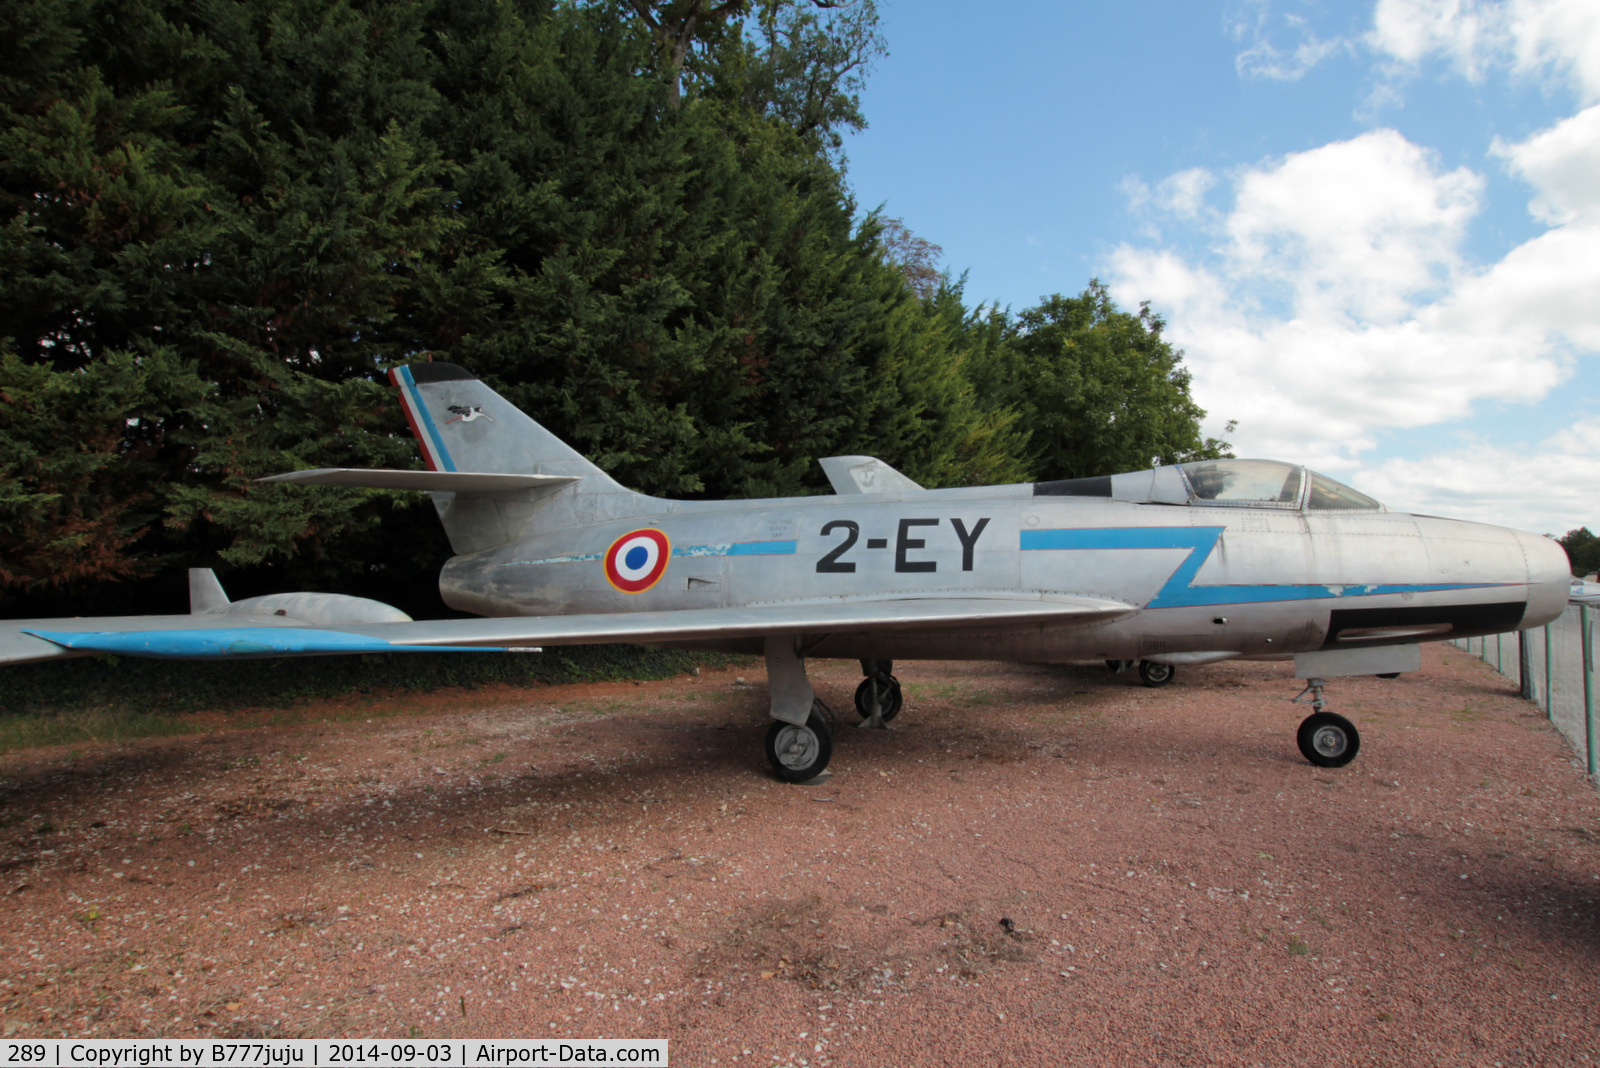 289, Dassault Mystere IVA C/N 289, at Savigny-Les-Beaune Museum.
Original model, the Mystère IVA 2-EY at Le Bourget is n°105